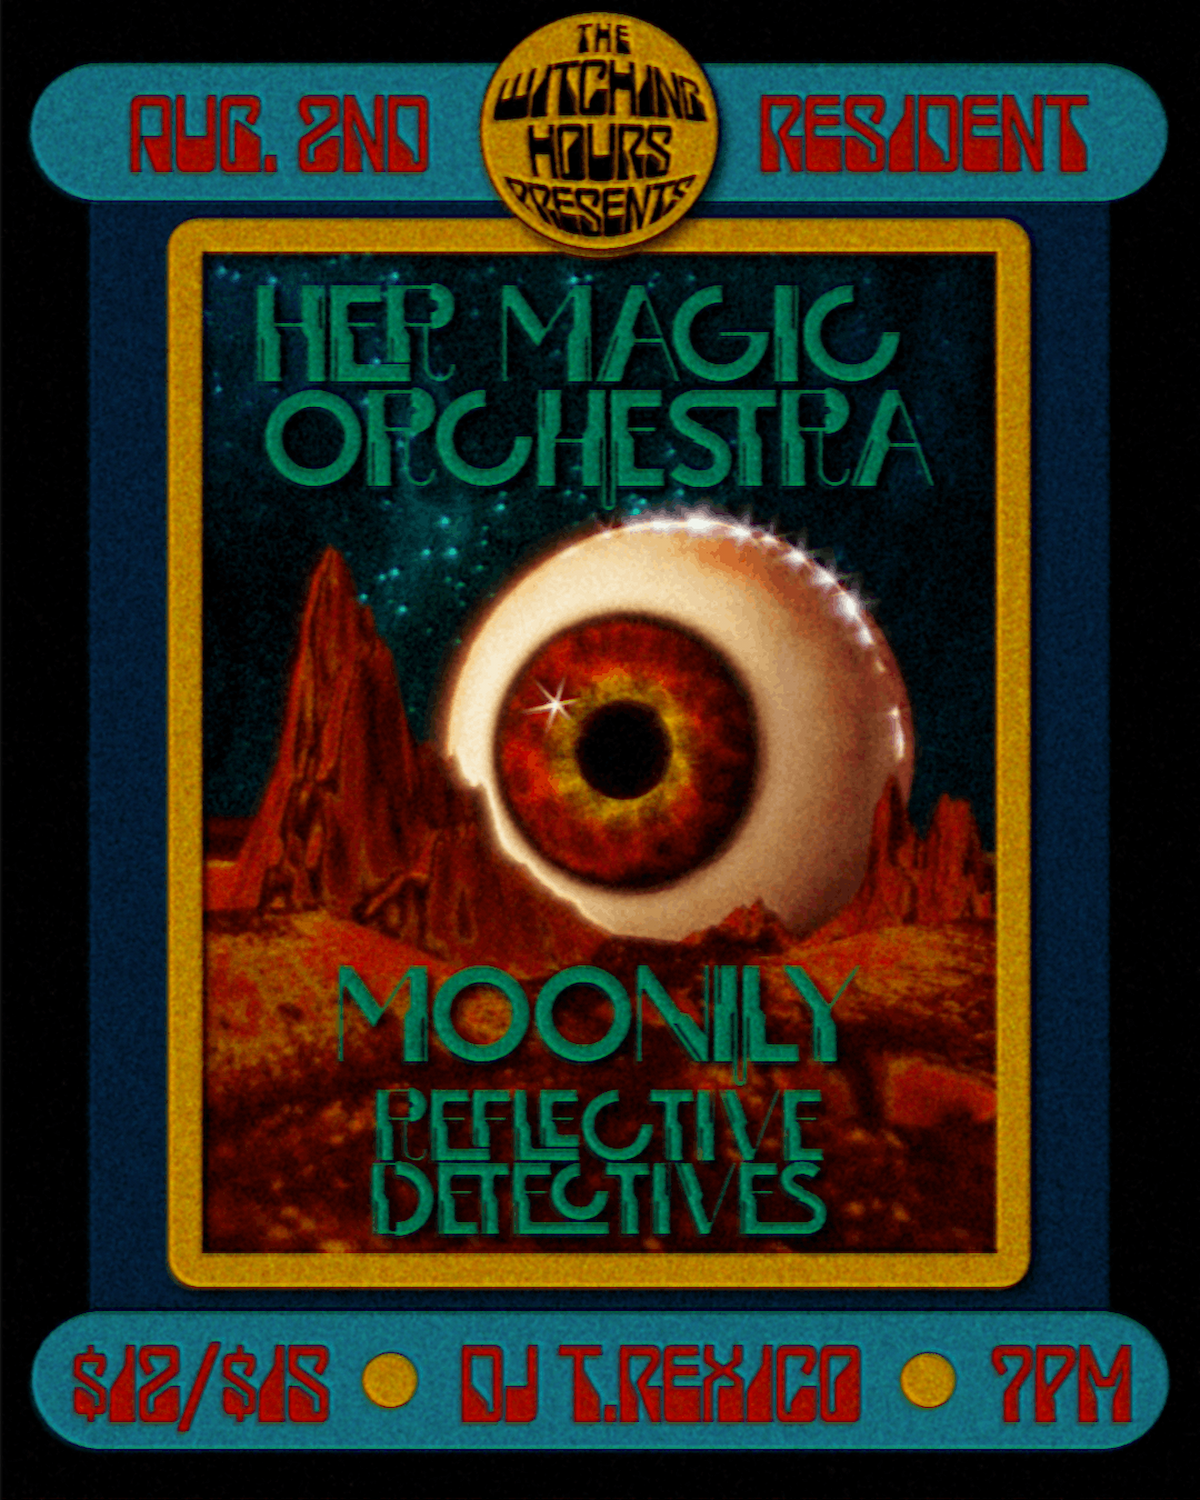 Her Magic Orchestra / Moonily / Reflective Detectives